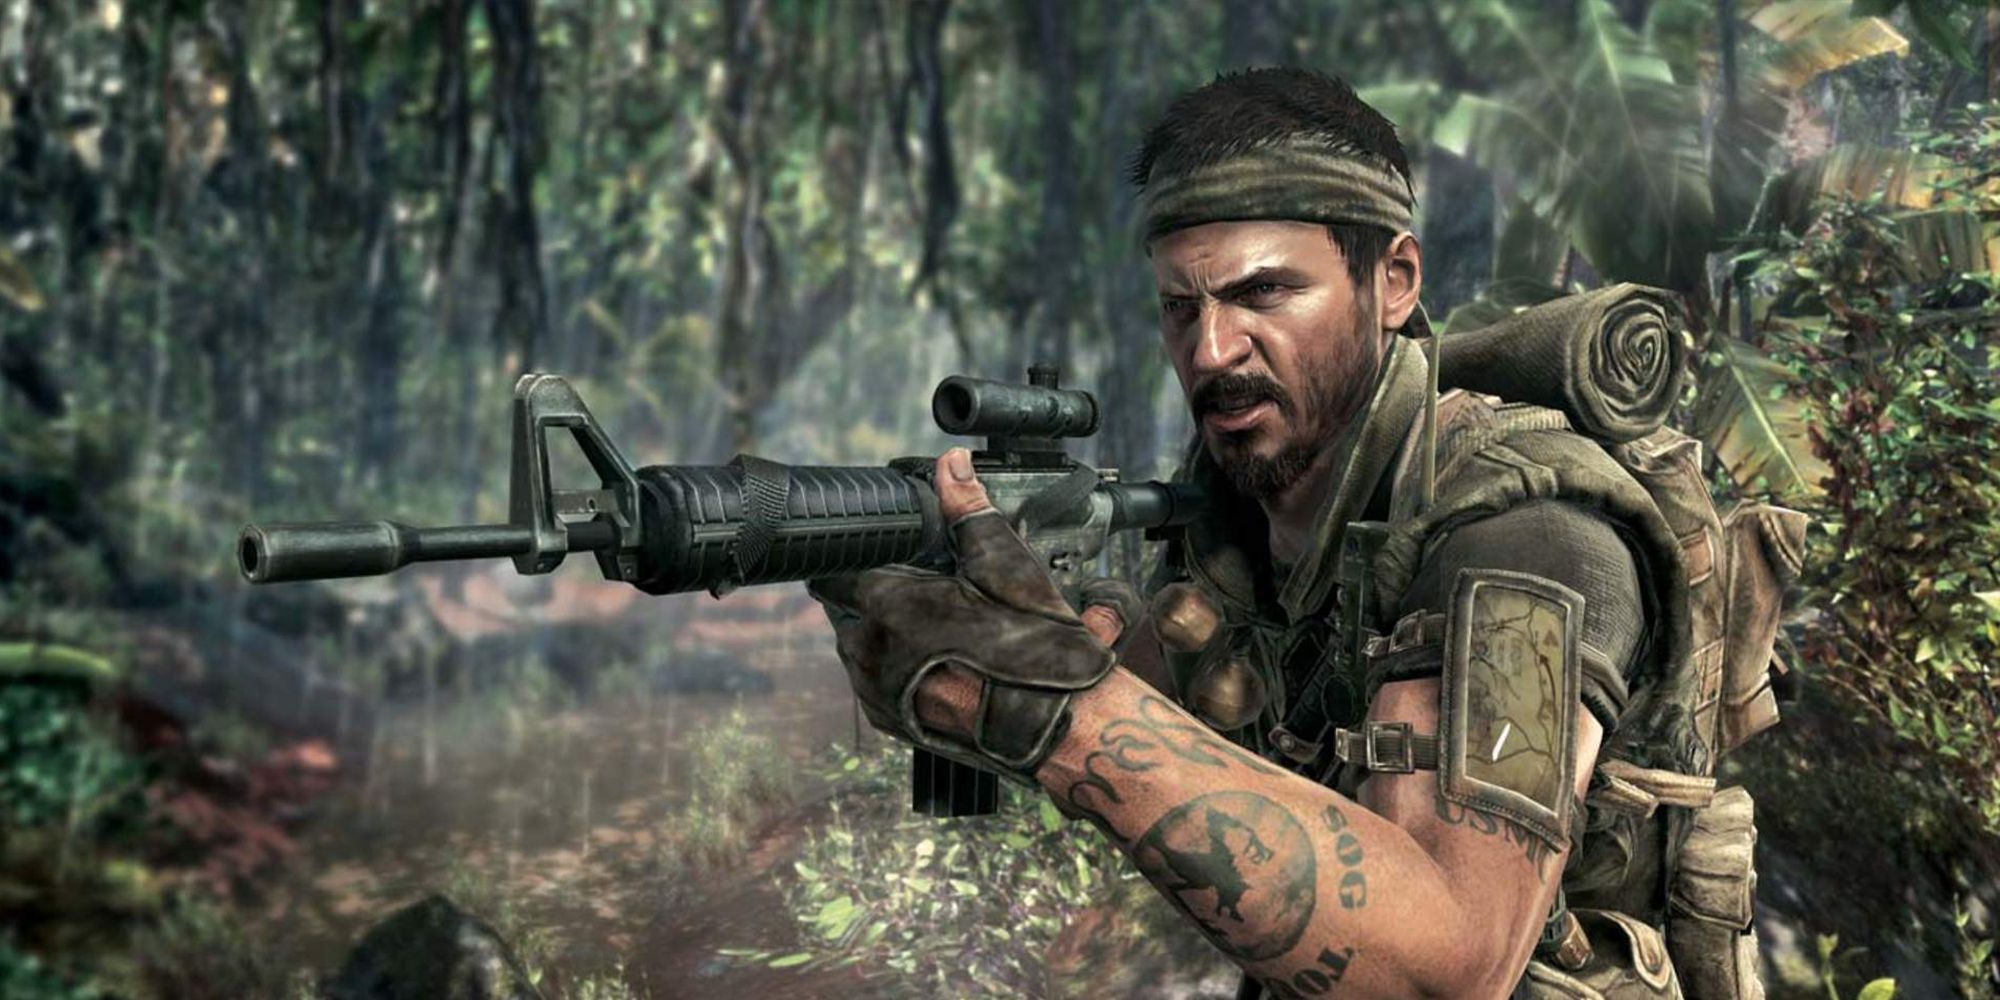 A soldier aims his gun in a dense forest in Call of Duty: Cold War